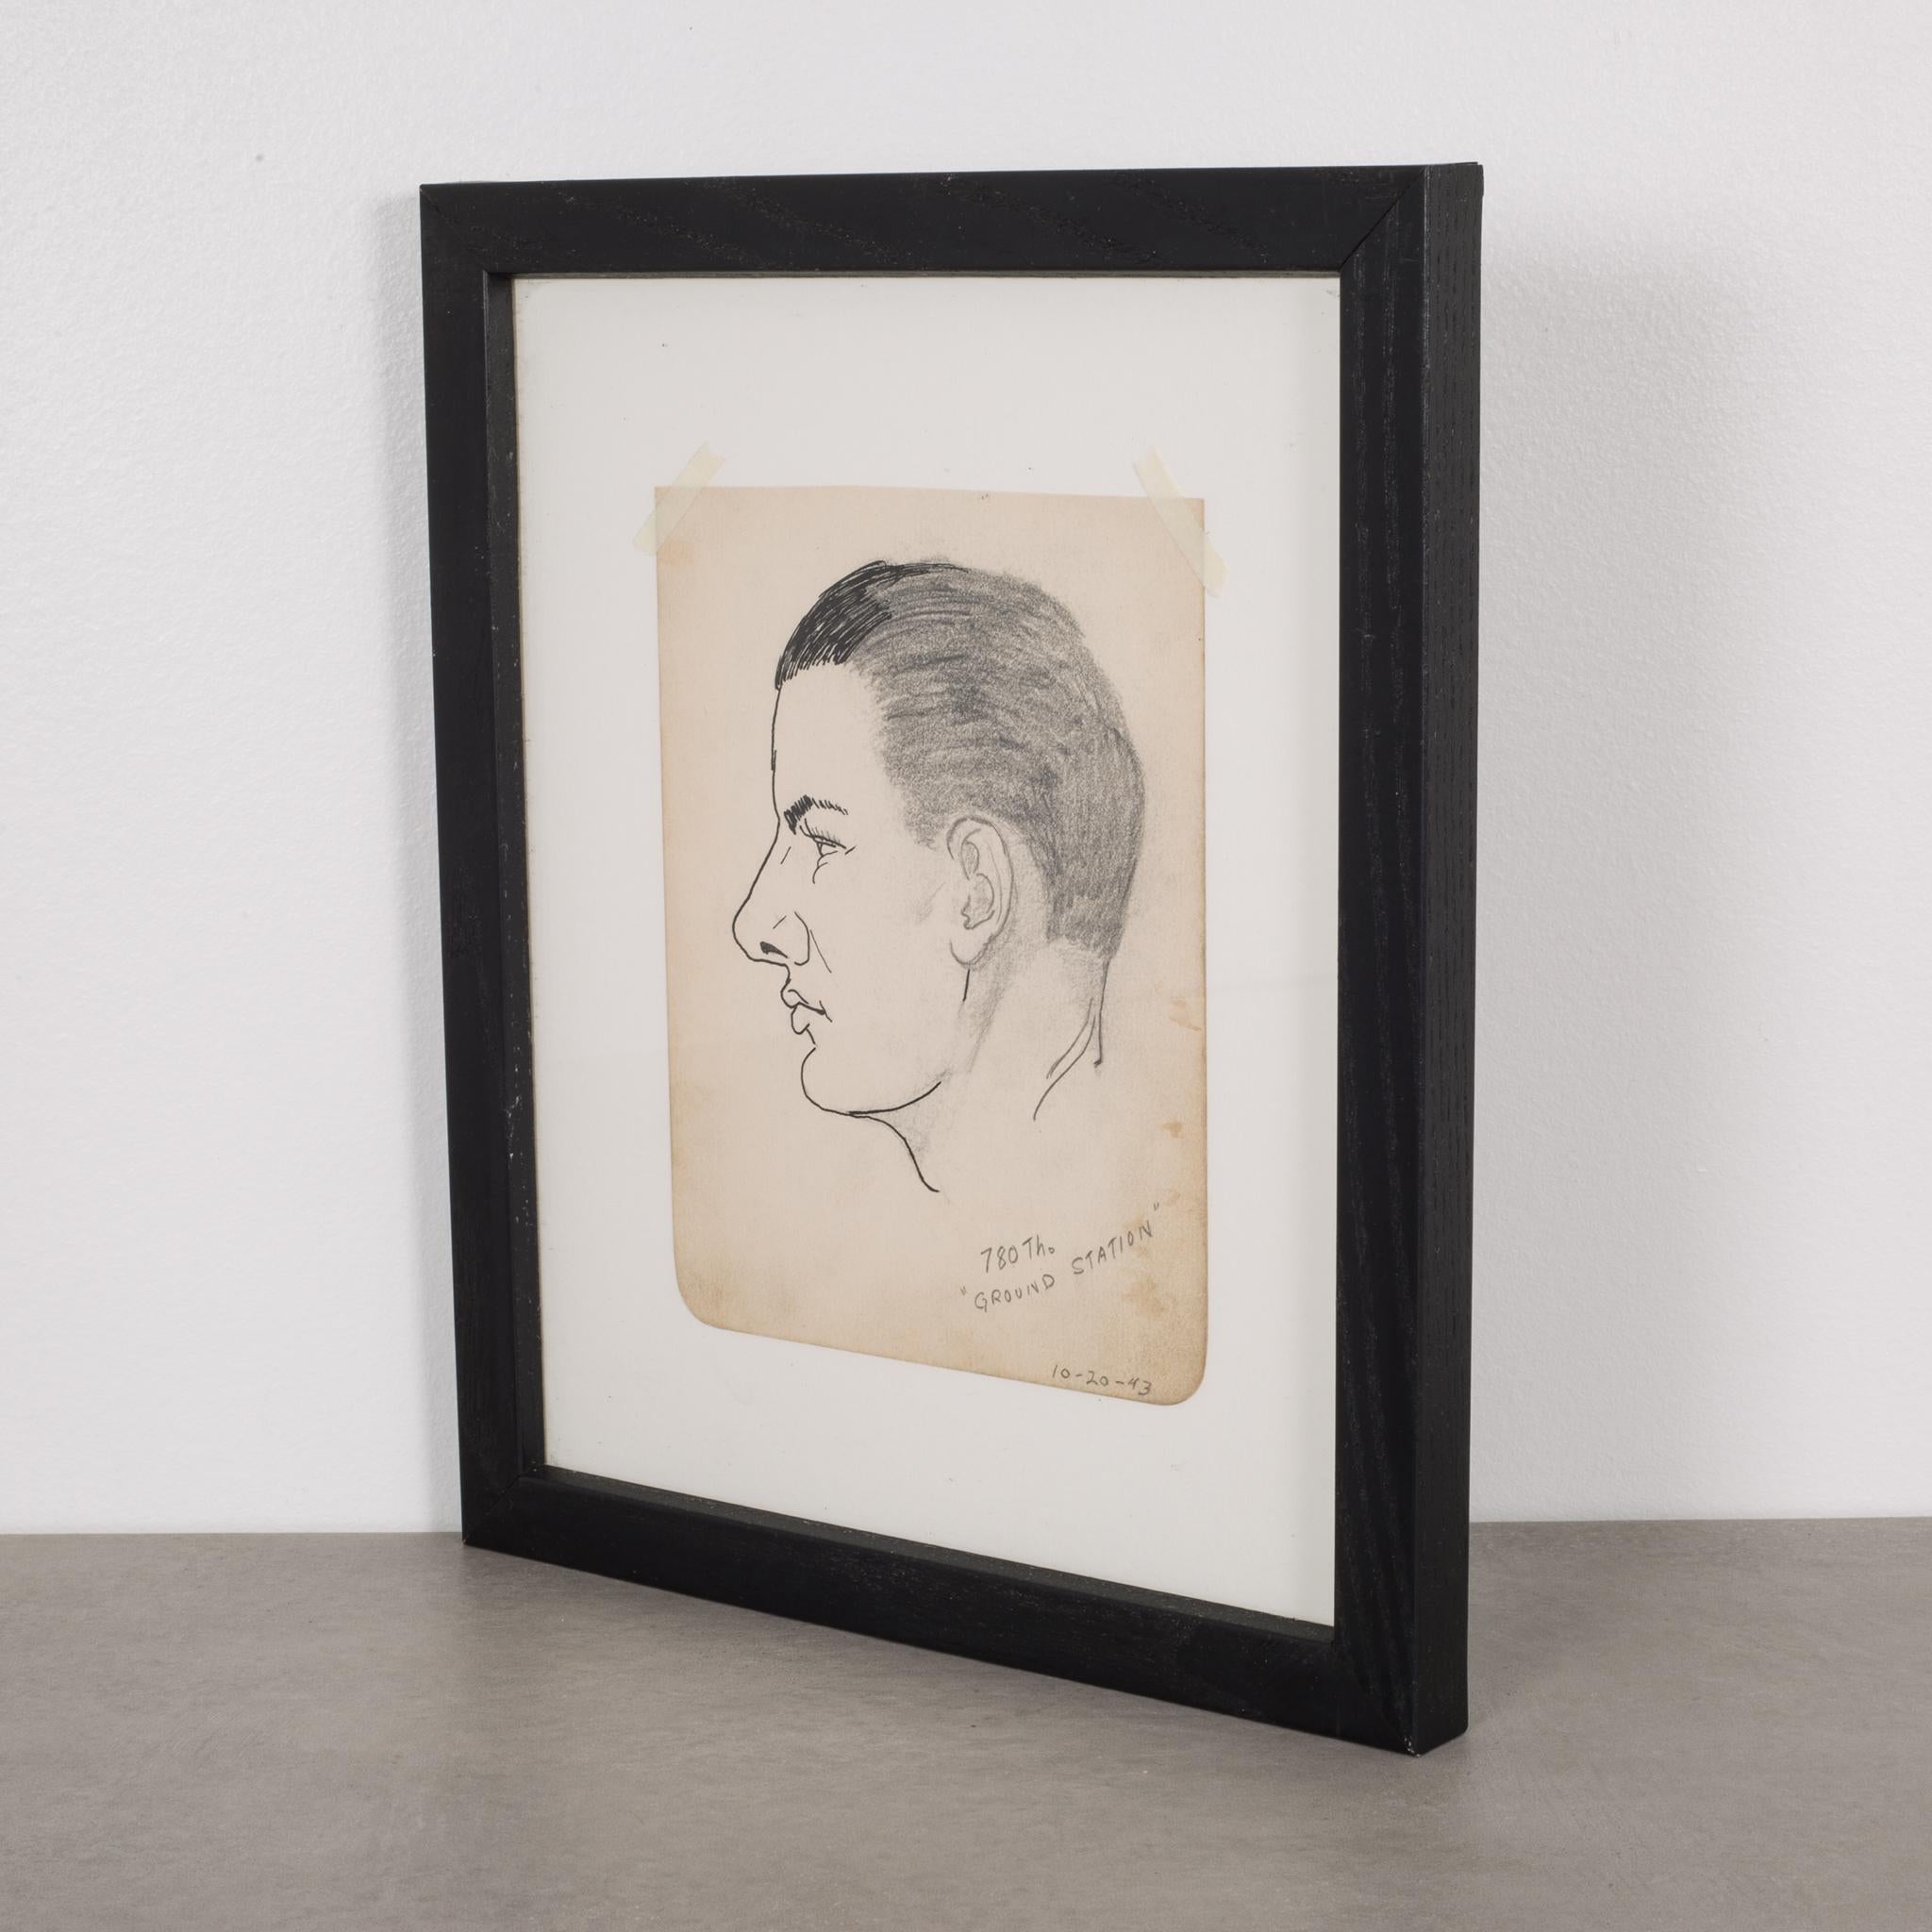 About

This is an original World War ll era pencil and ink sketch of a man, possibly a serviceman. Titled 